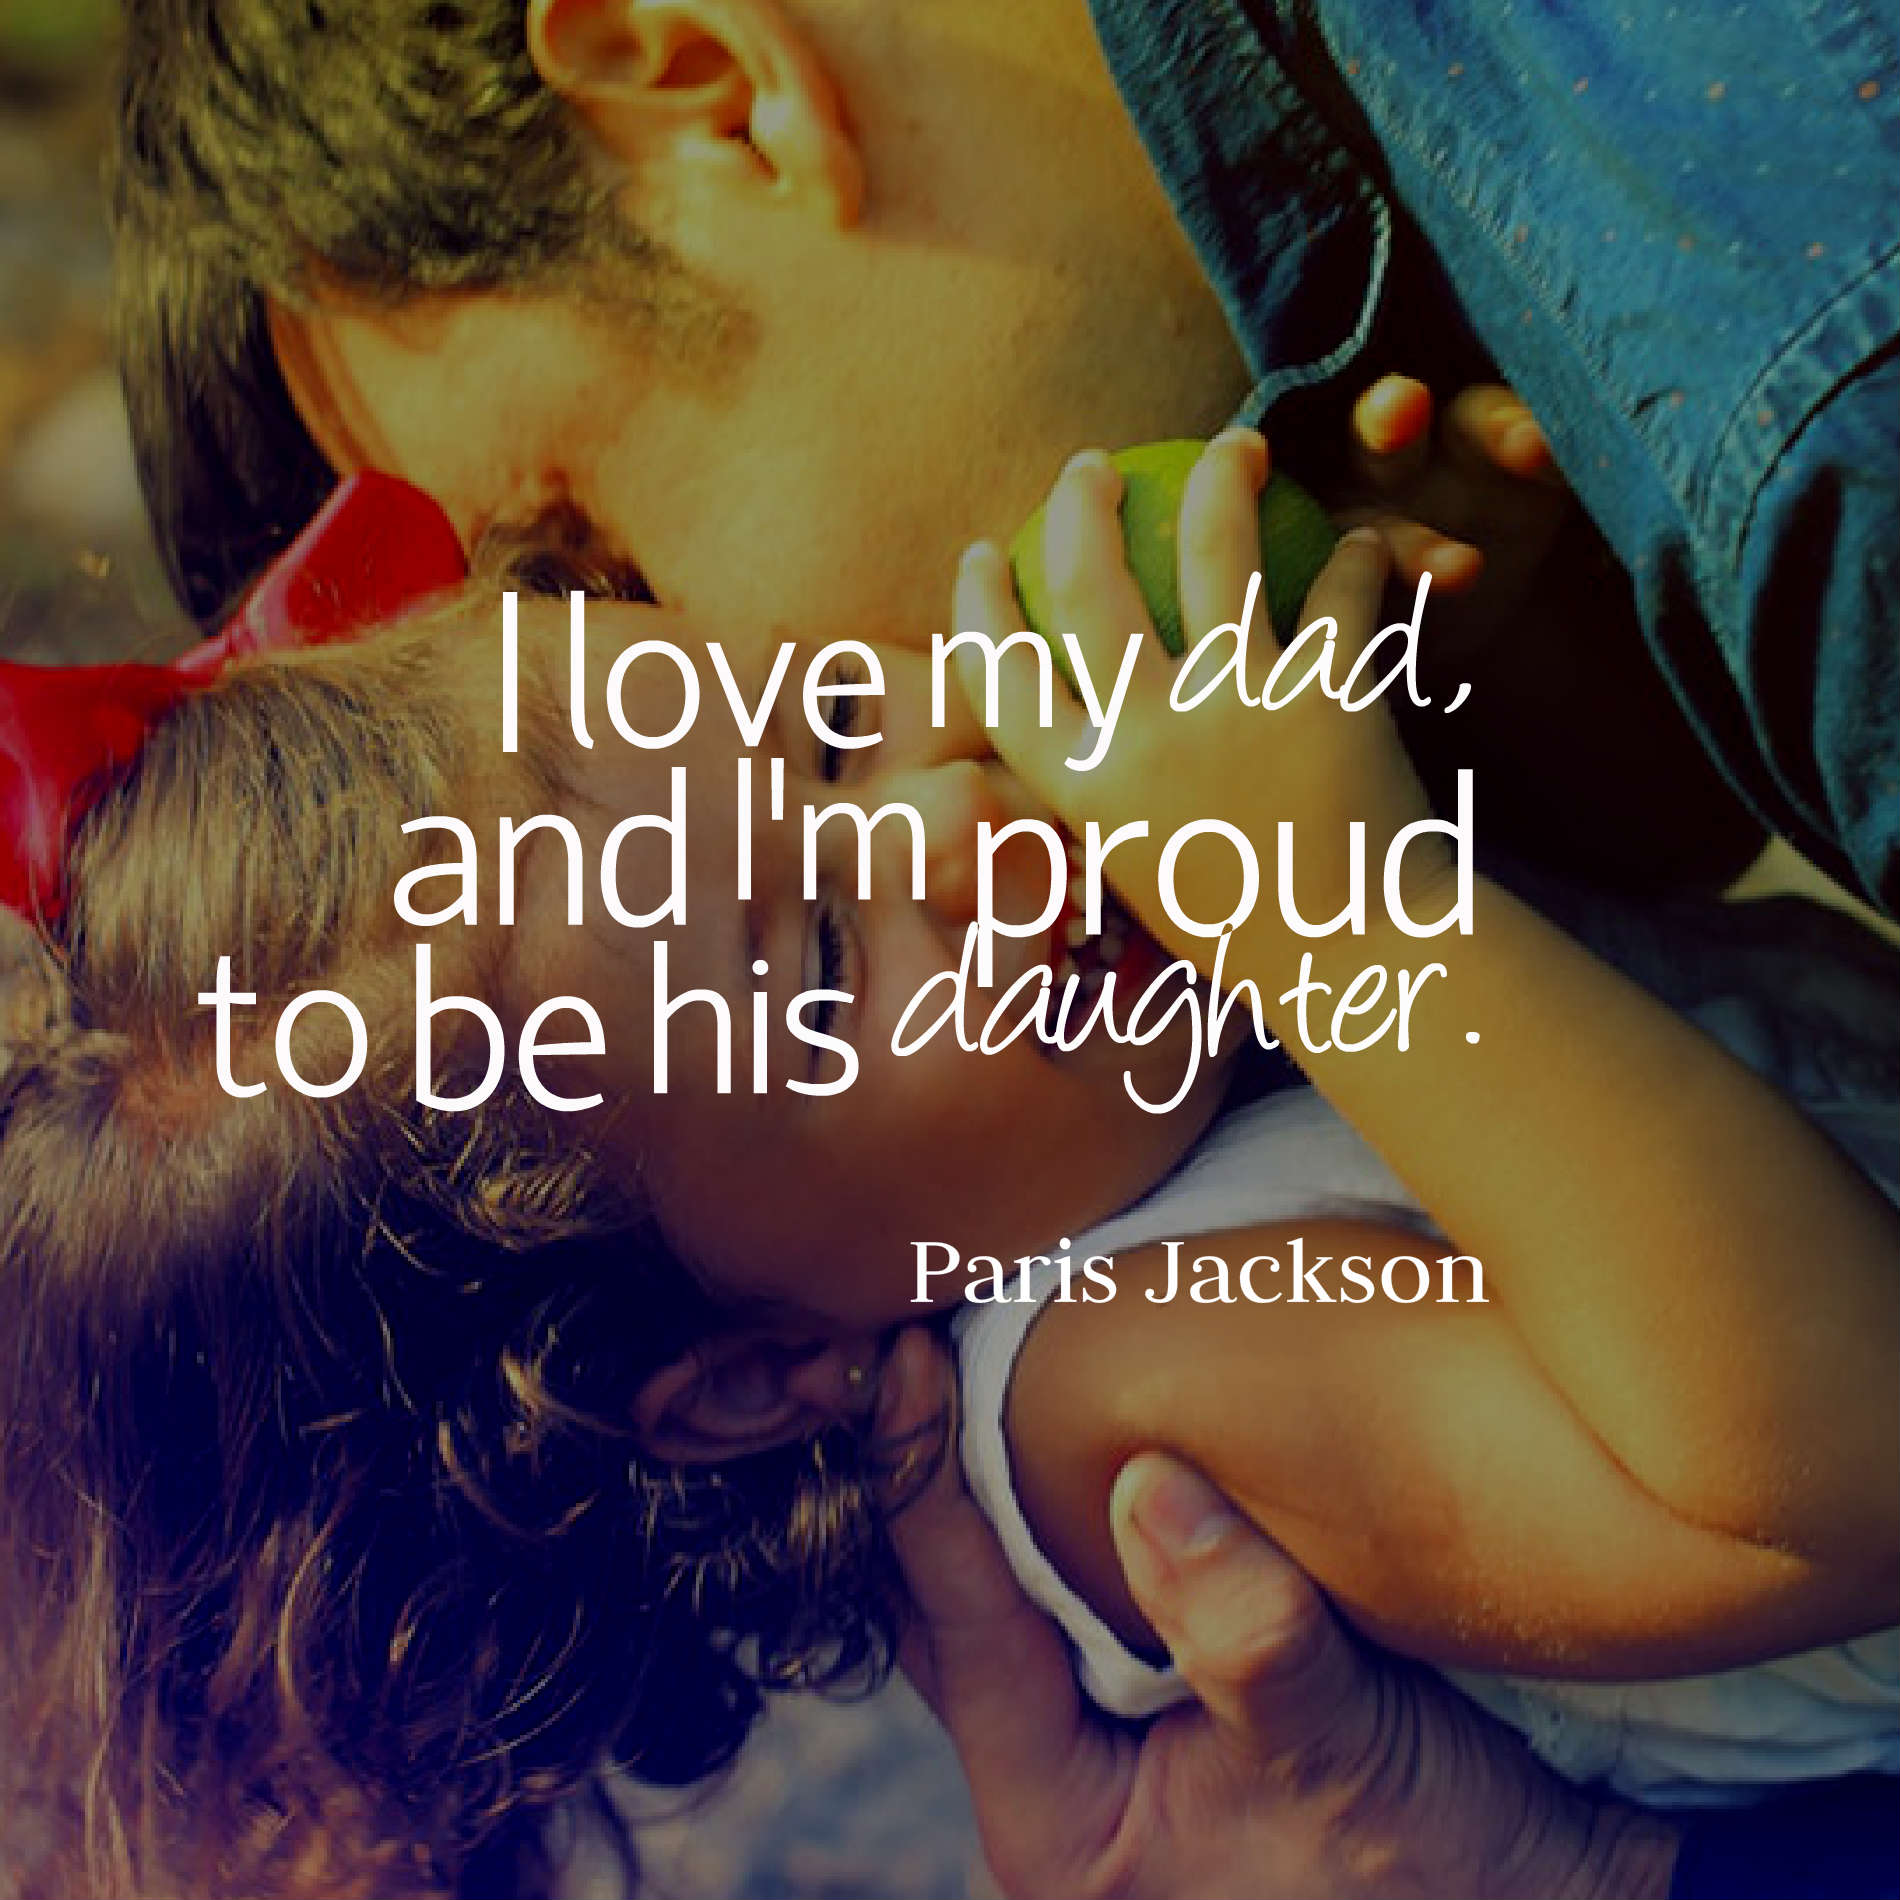 I love my dad, and I'm proud to be his daughter.